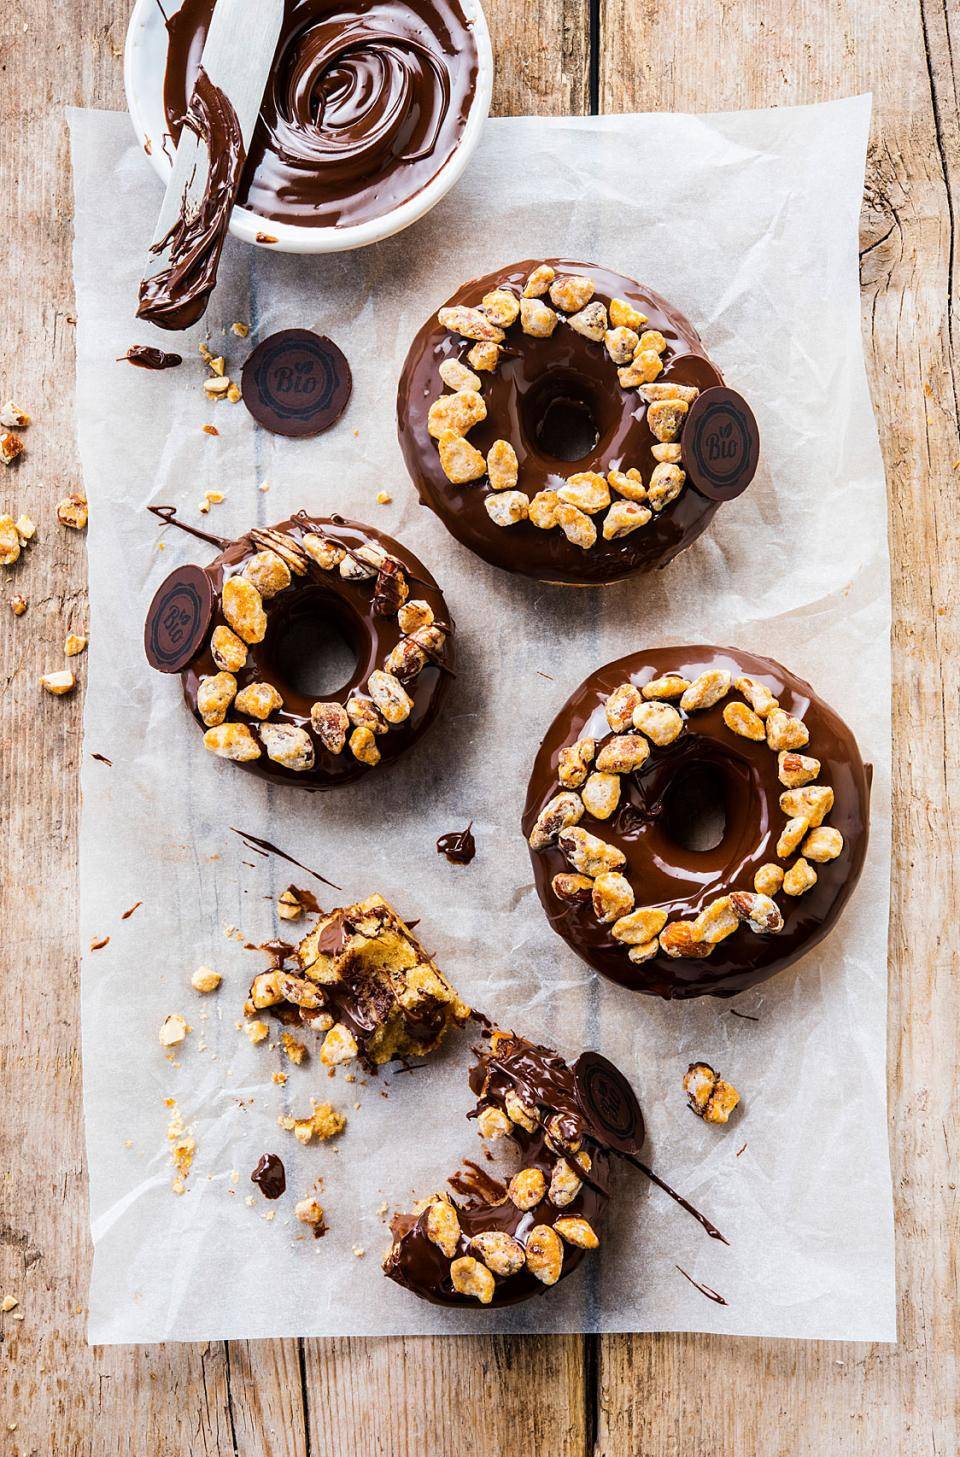 Chocolate fillings and glazings donut